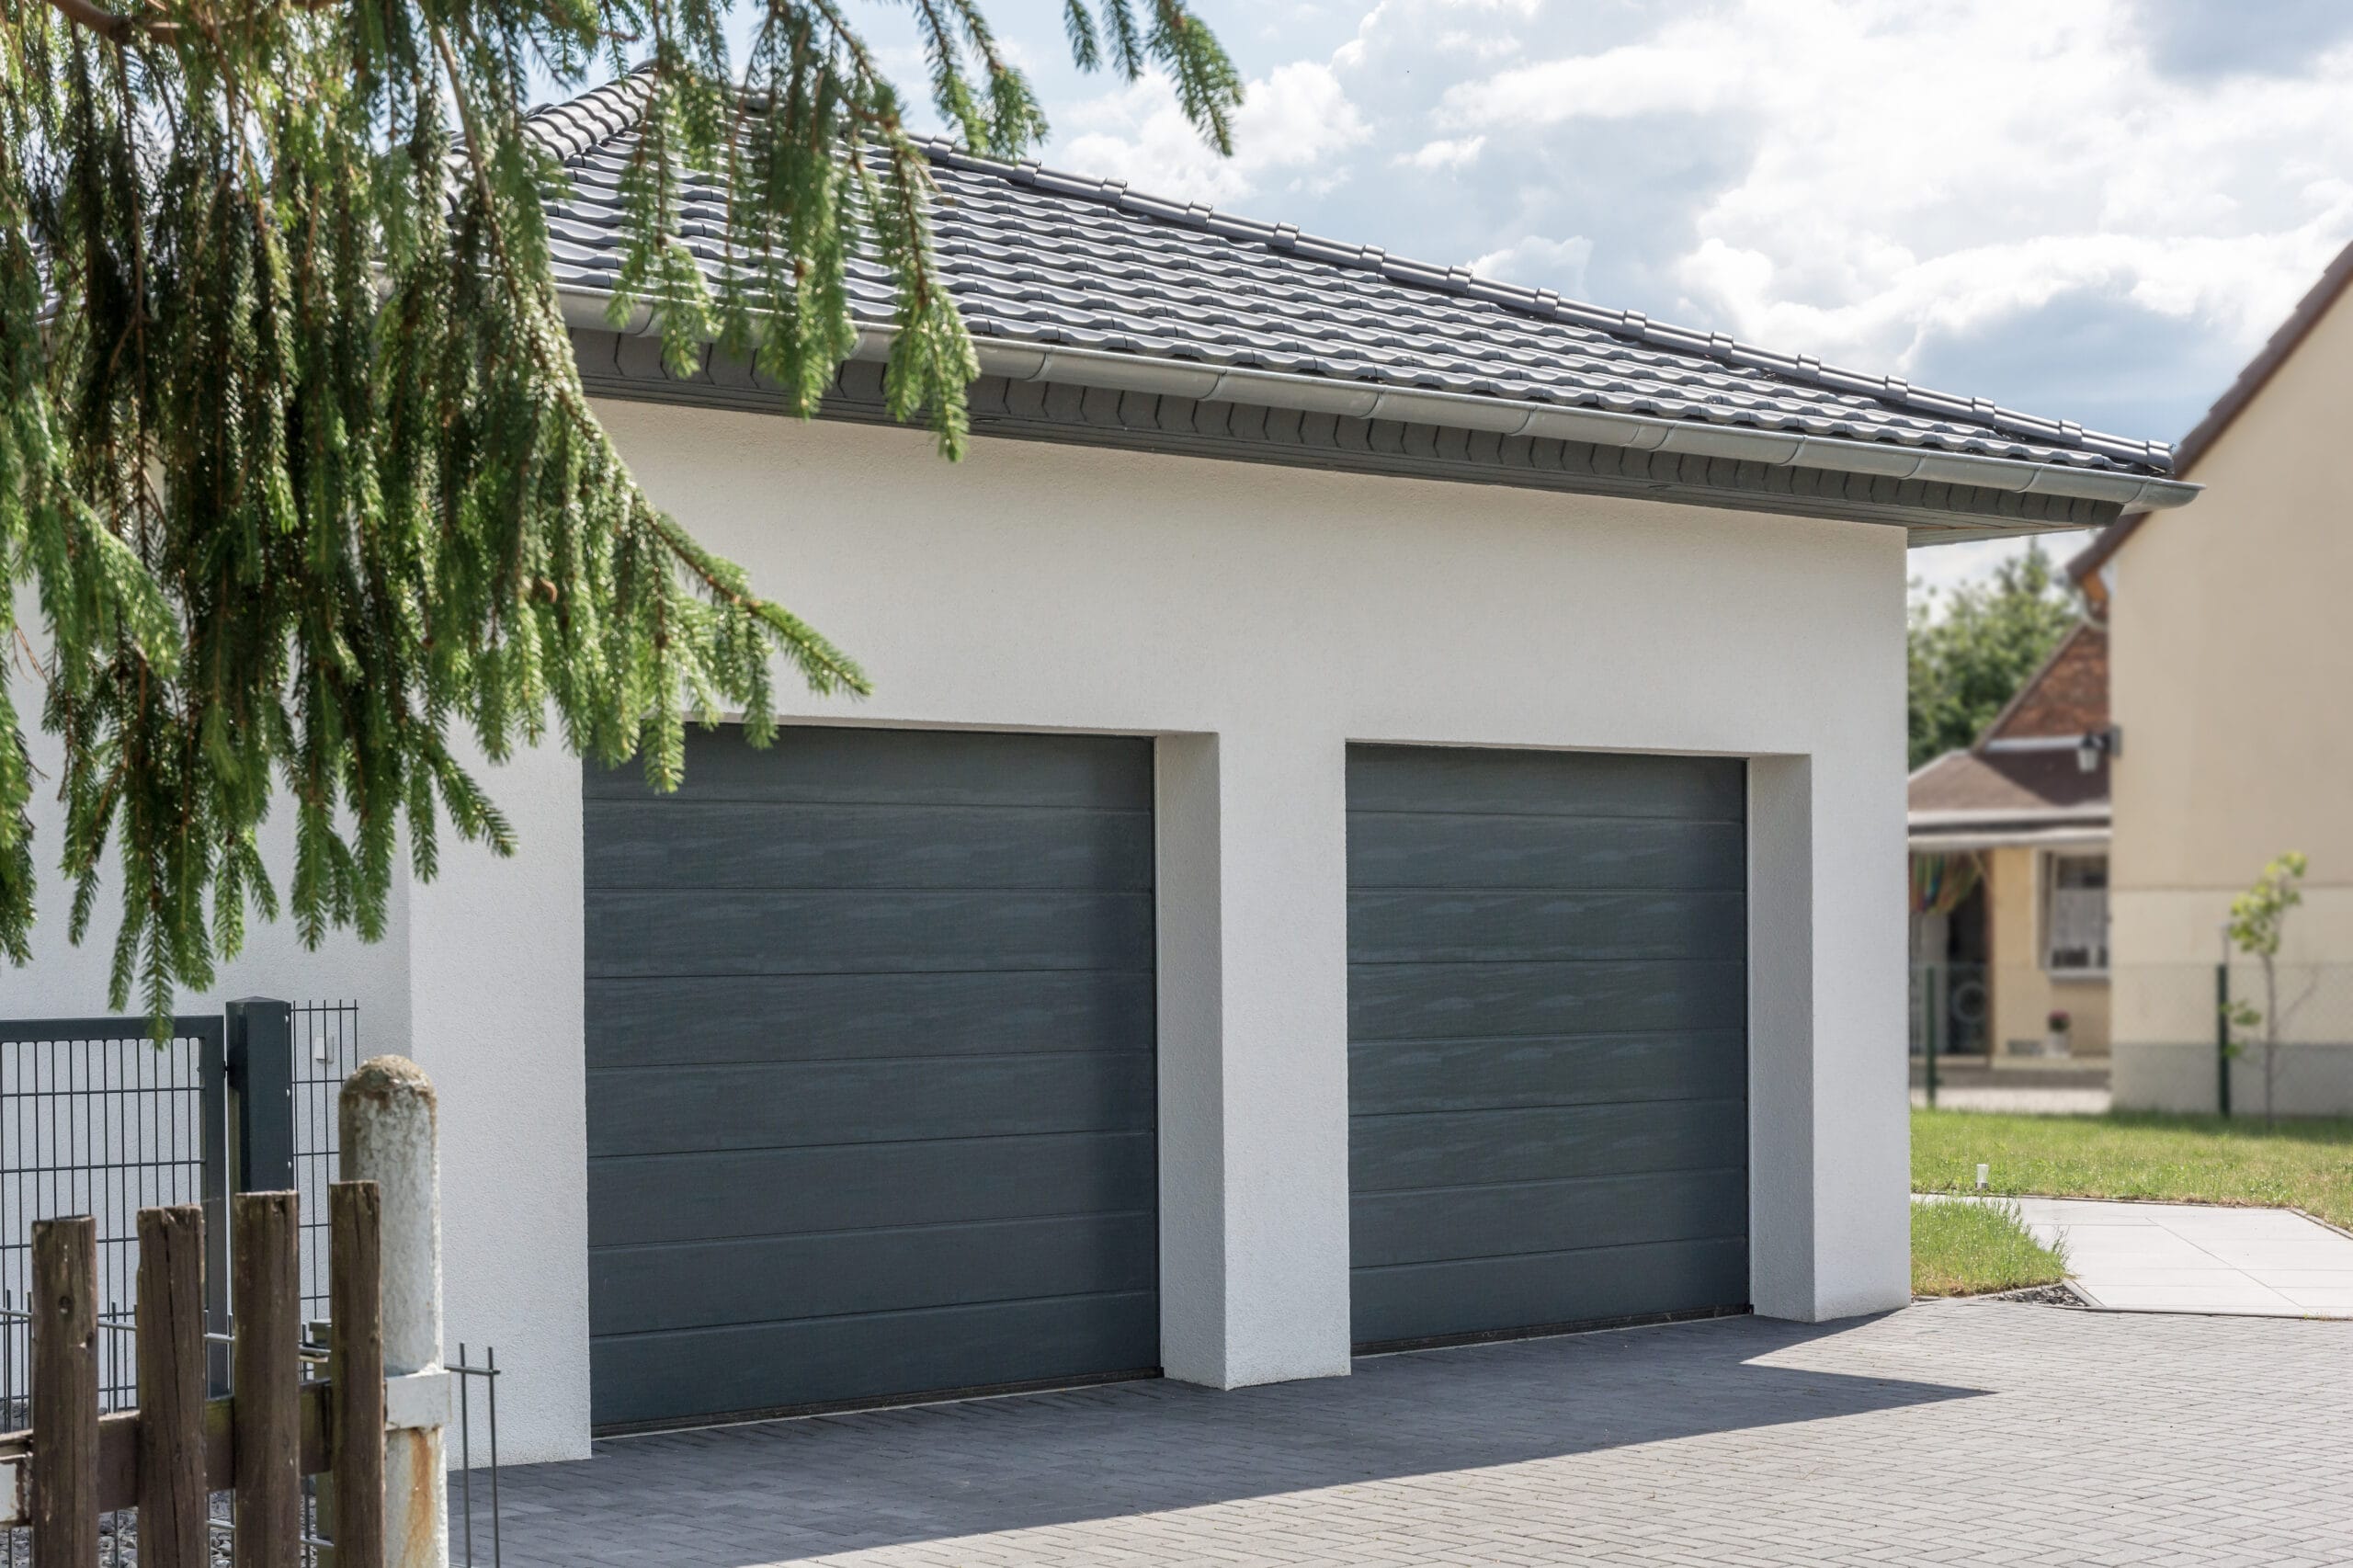 double garage with two sectional garage doors in grey